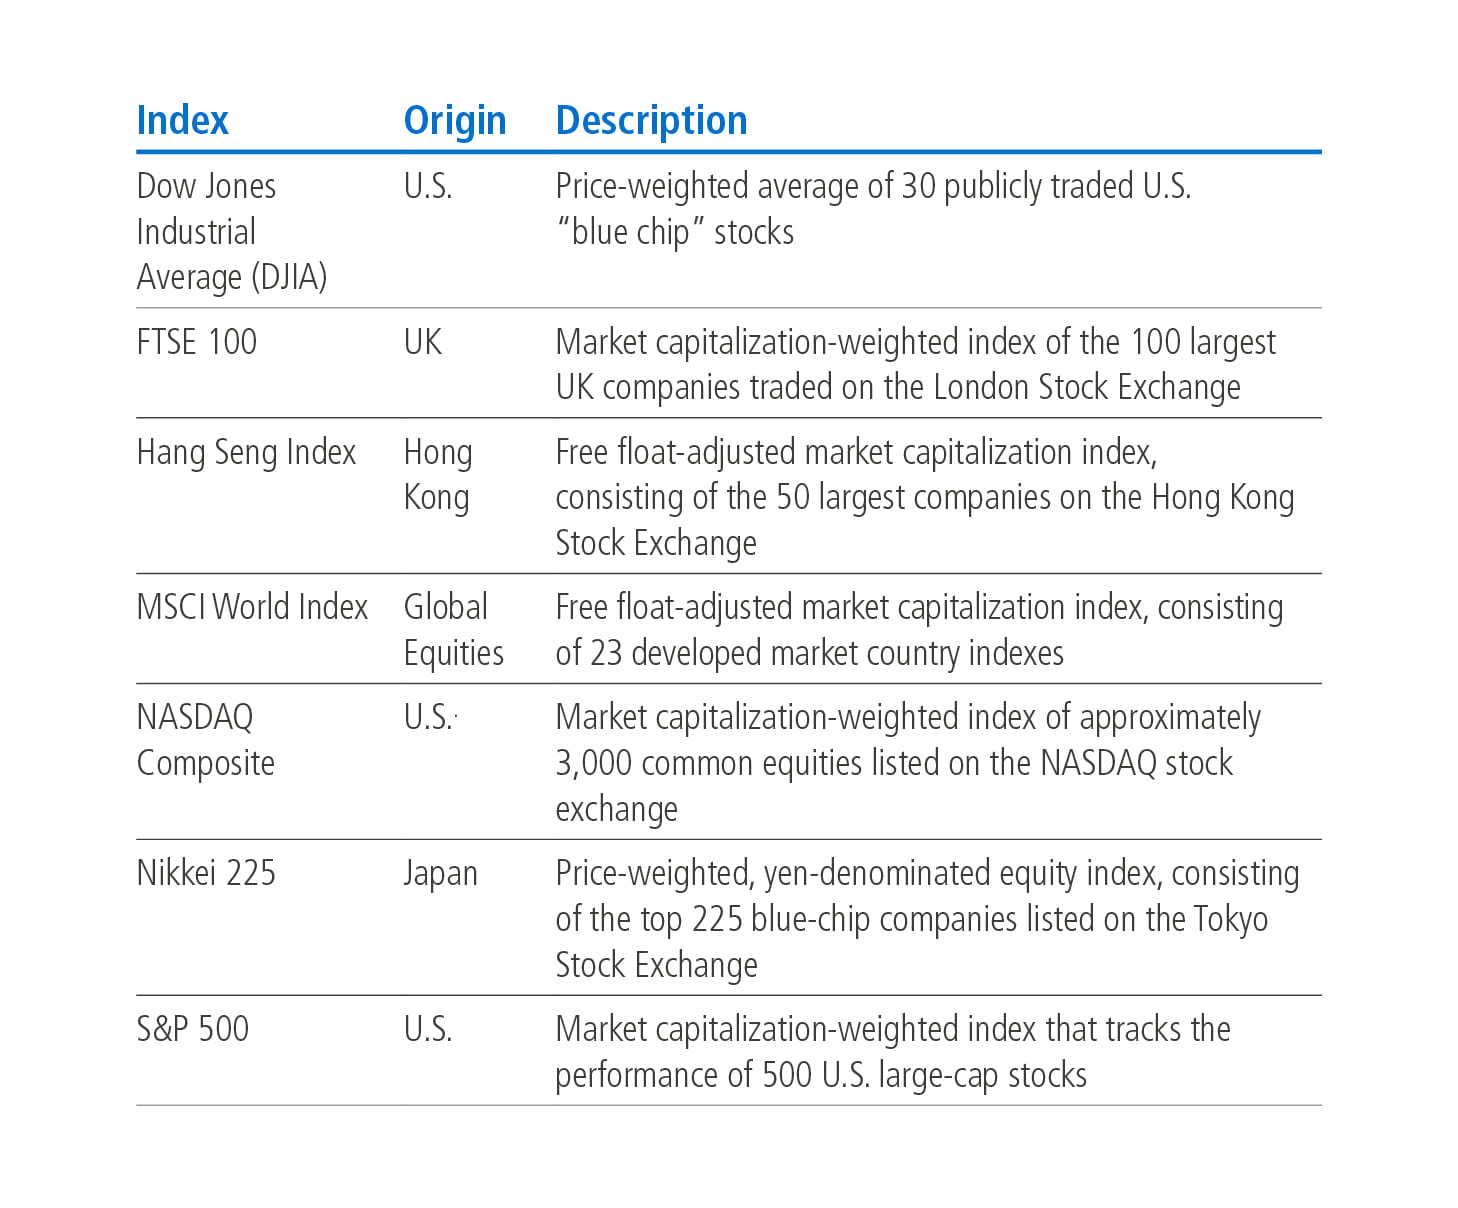 A table lists seven indices (Dow Jones Industrial Average, FTSE 100, Hang Seng, MSCI World, NASDAQ, Nikkei 225, S&P 500), their focus region and description of the index and holdings